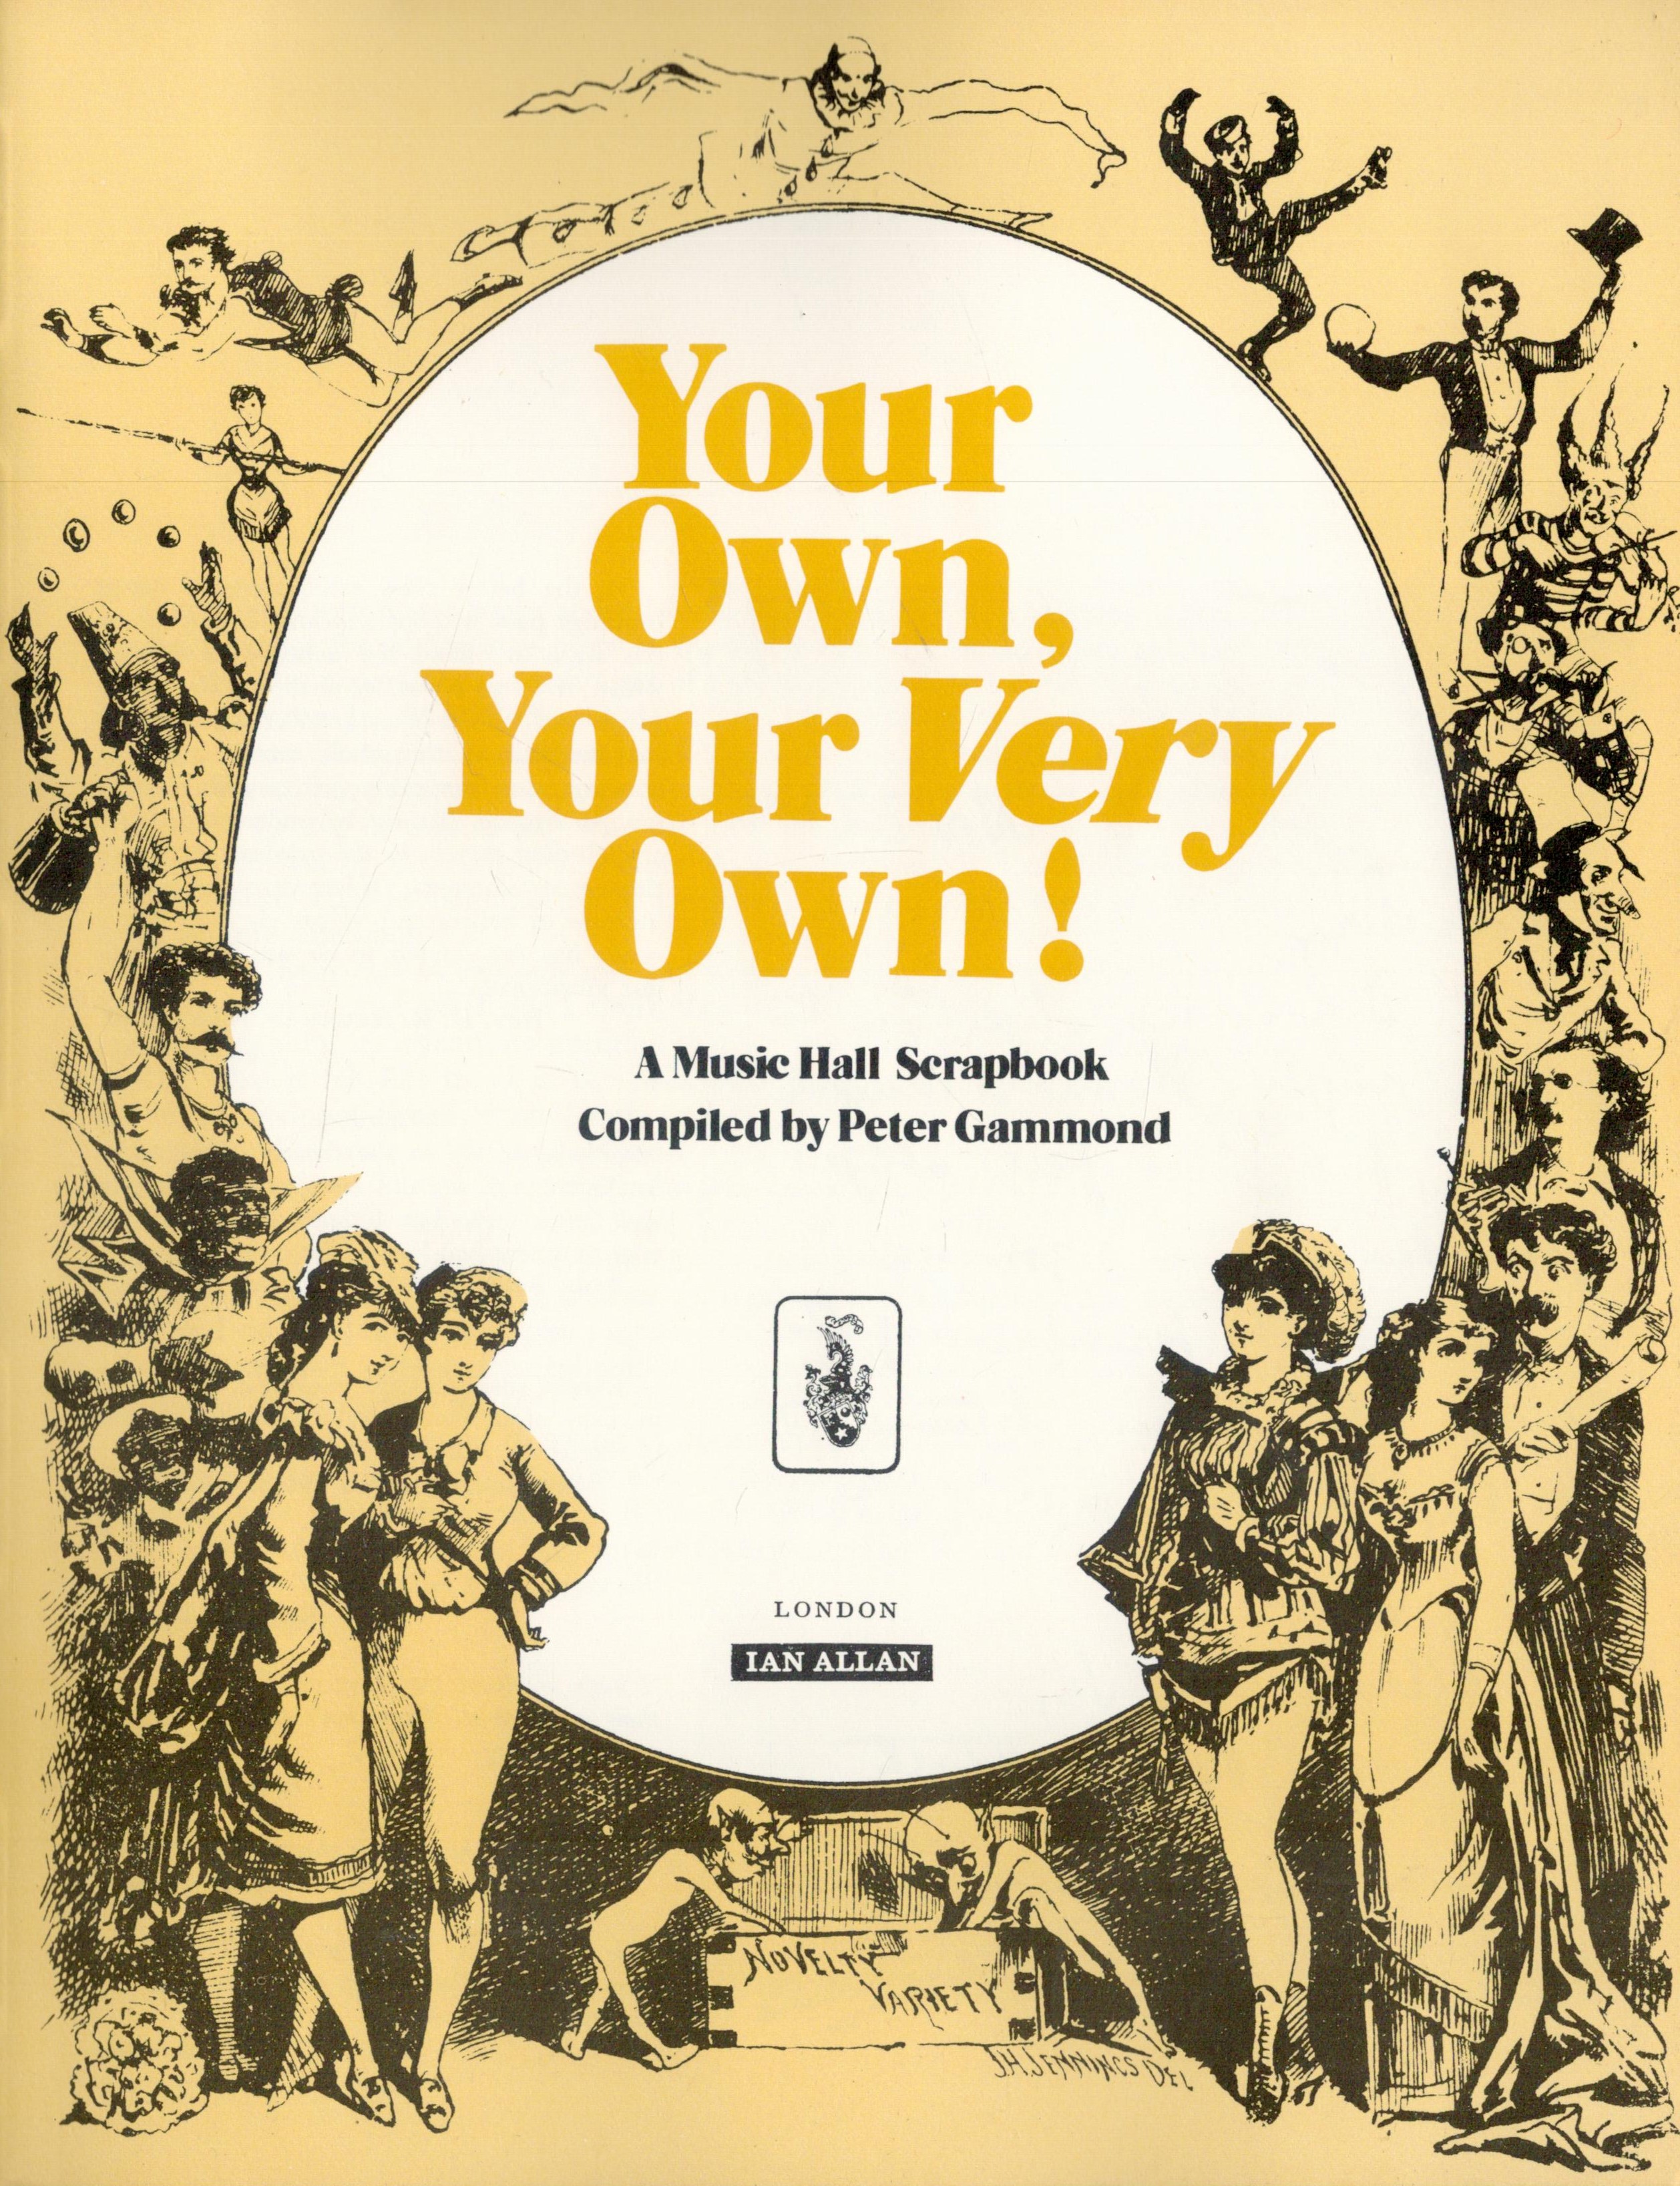 Your Own, Your Very Own! A Music Hall Scrapbook, compiled by Peter Gammond. Published by Ian4 Allan, - Image 2 of 3